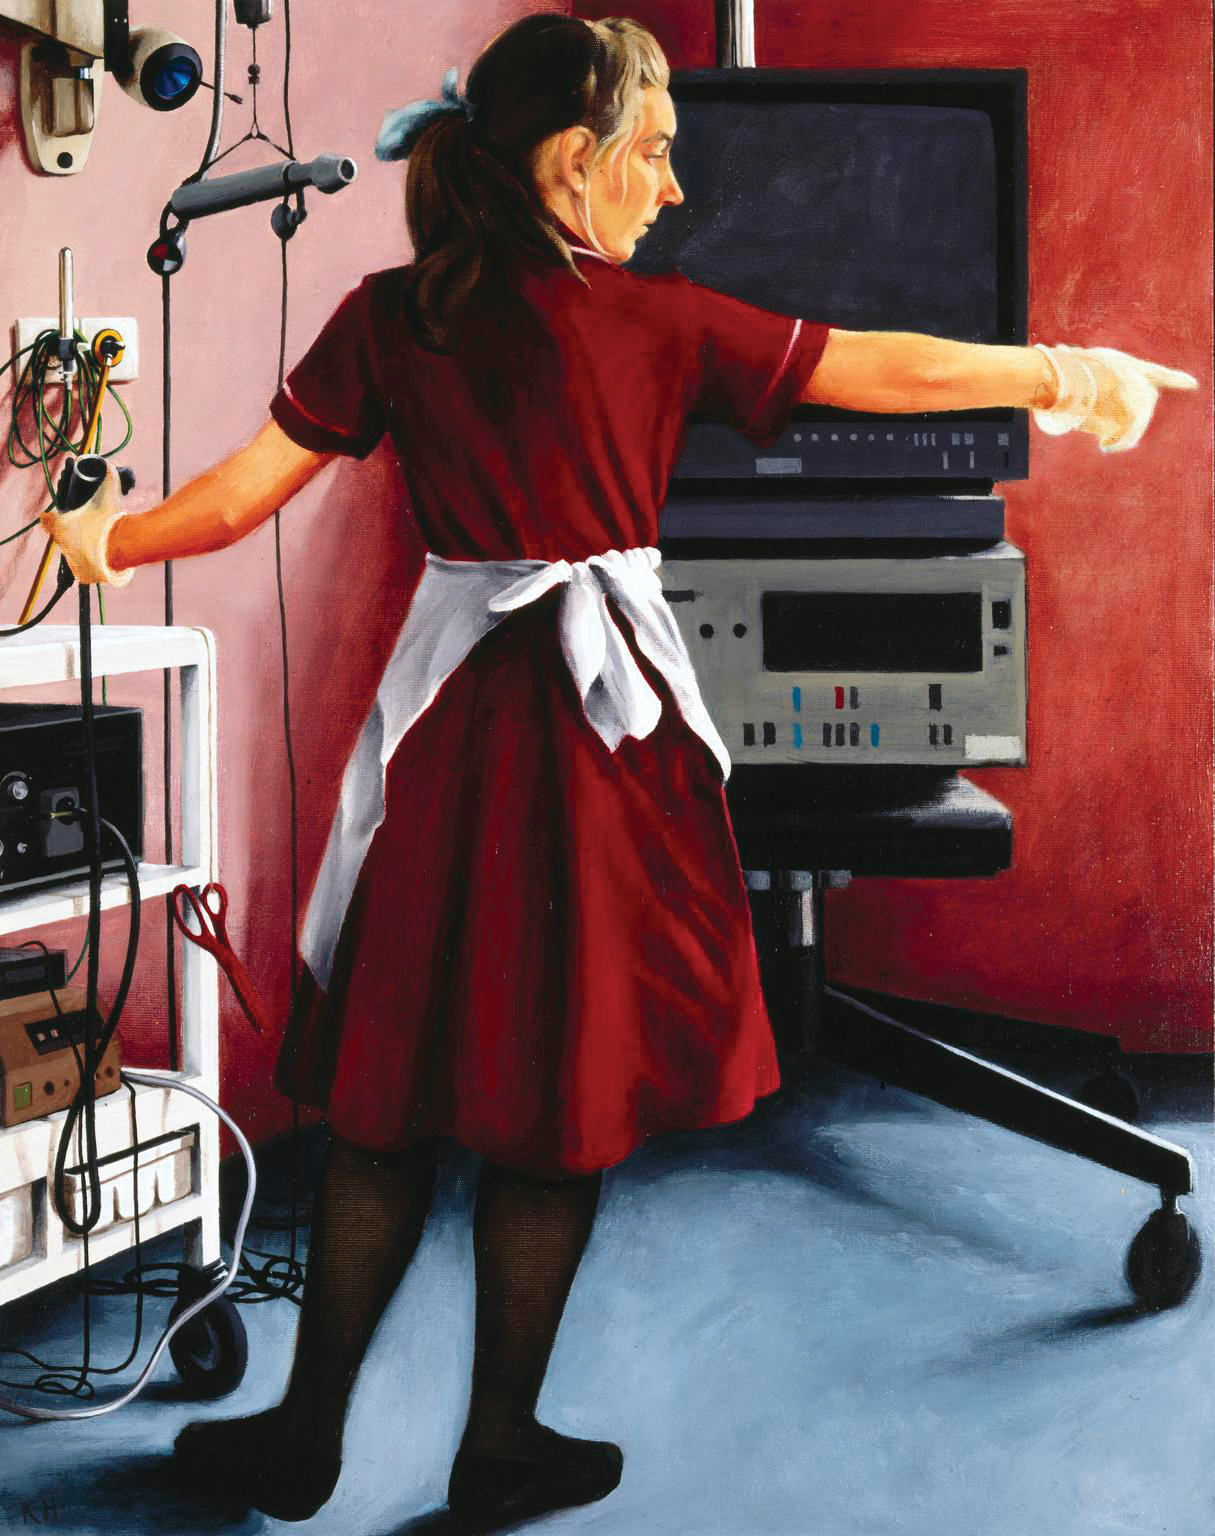 Keith Holmes, Nurse in Red, 1991–1993, oil on board, 25.2 x 18.9 in. © Keith Holmes. Photo credit: Science Museum / Science & Society Picture Library.